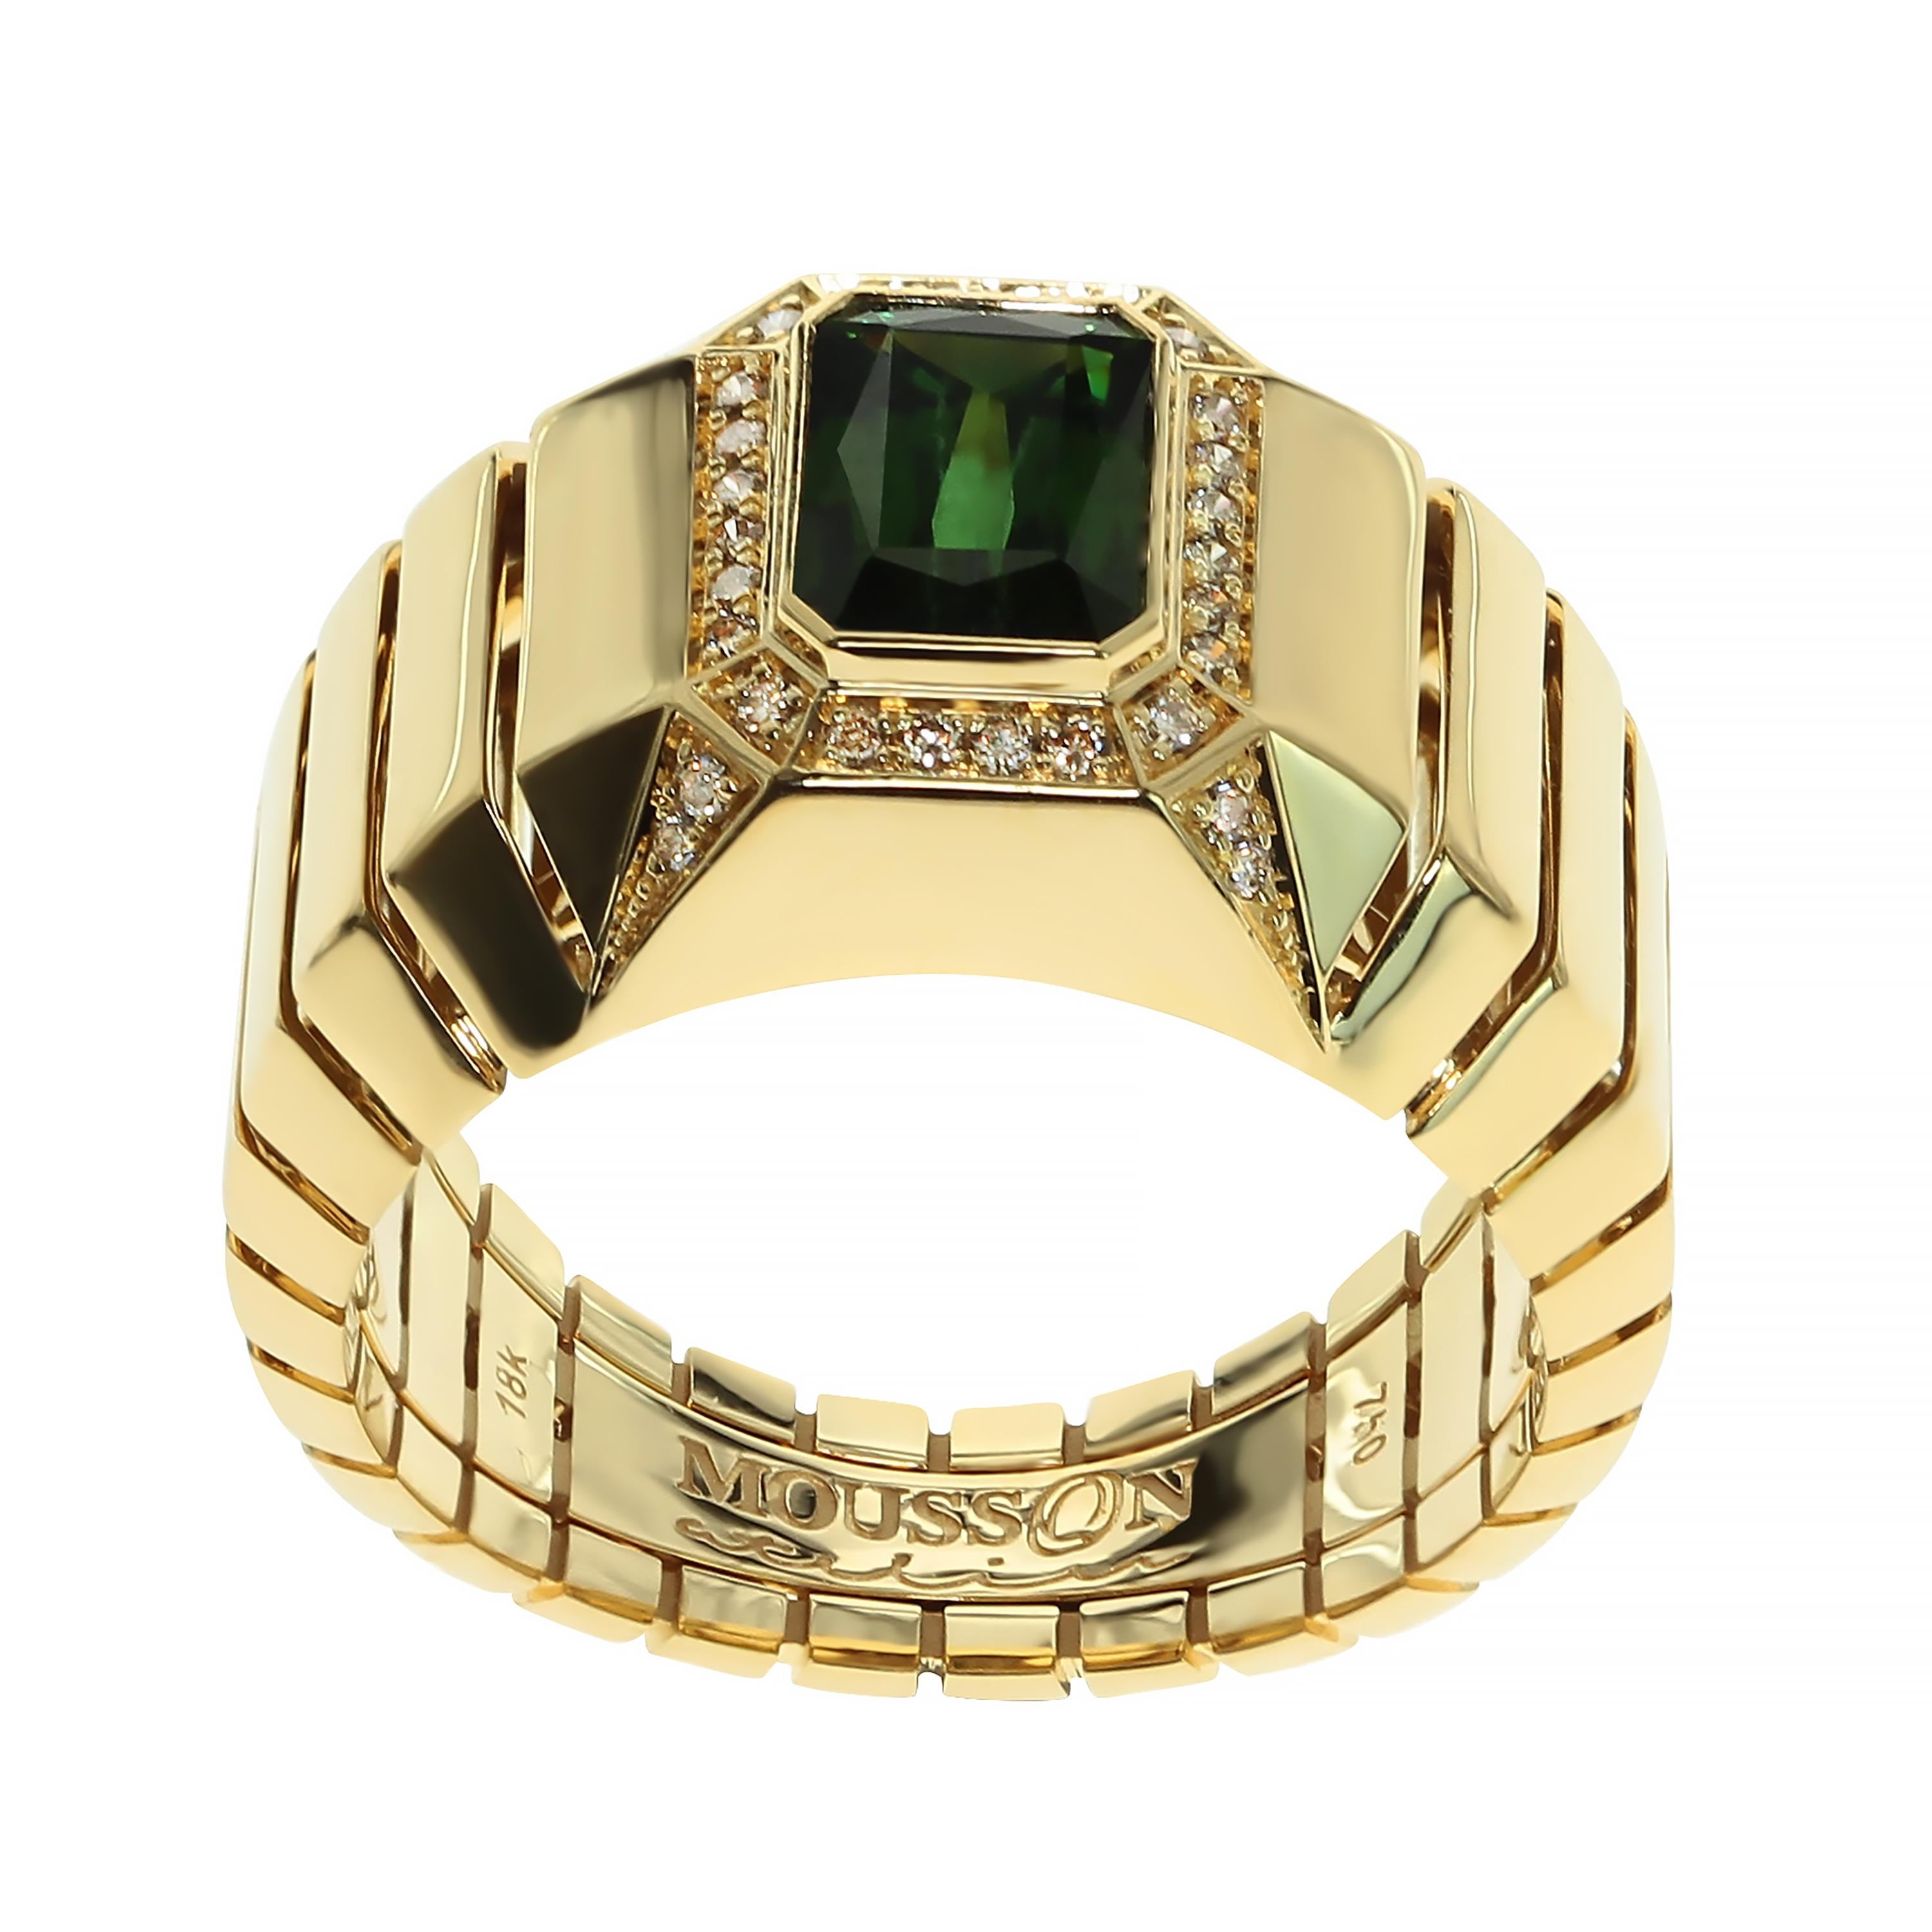 18 Karat Yellow Gold Tourmaline Brown Diamond Male Ring

1,82 carat Tourmaline and Brown Diamond Male Ring. Bold and Masculine design

13x13x27.3 mm
11.54 gm 

US Size 10 1/4
EU Size 62 1/8

can be done in any size (lead time 3 week)